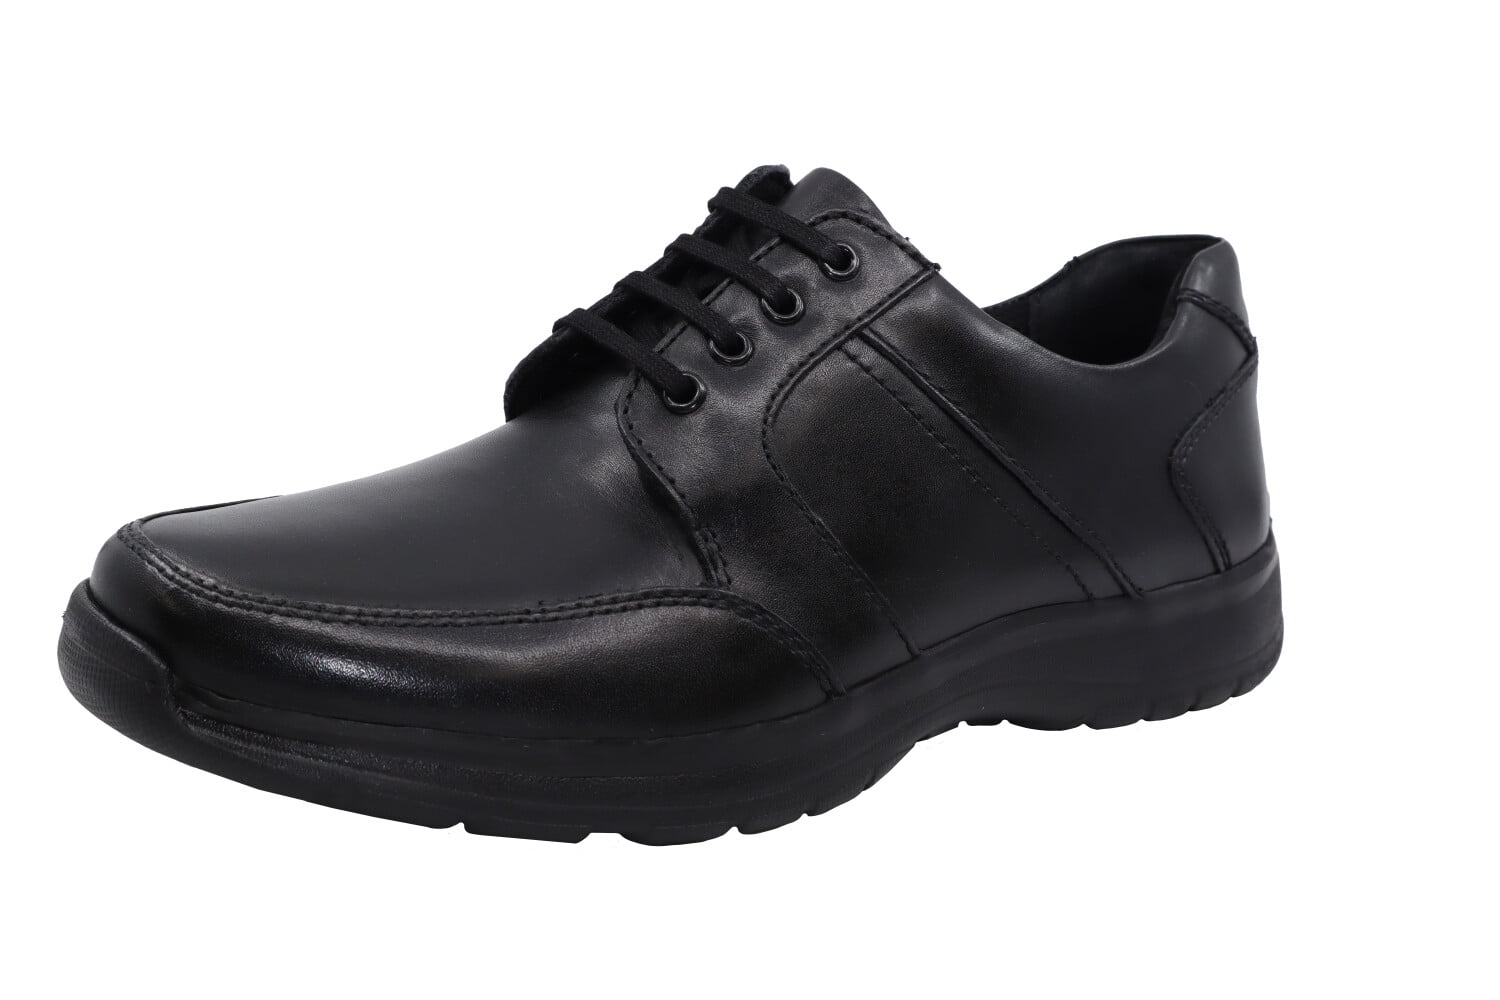 Hush Puppies Men's Leader Henson Black Ankle-High Leather Oxford - 14 W ...